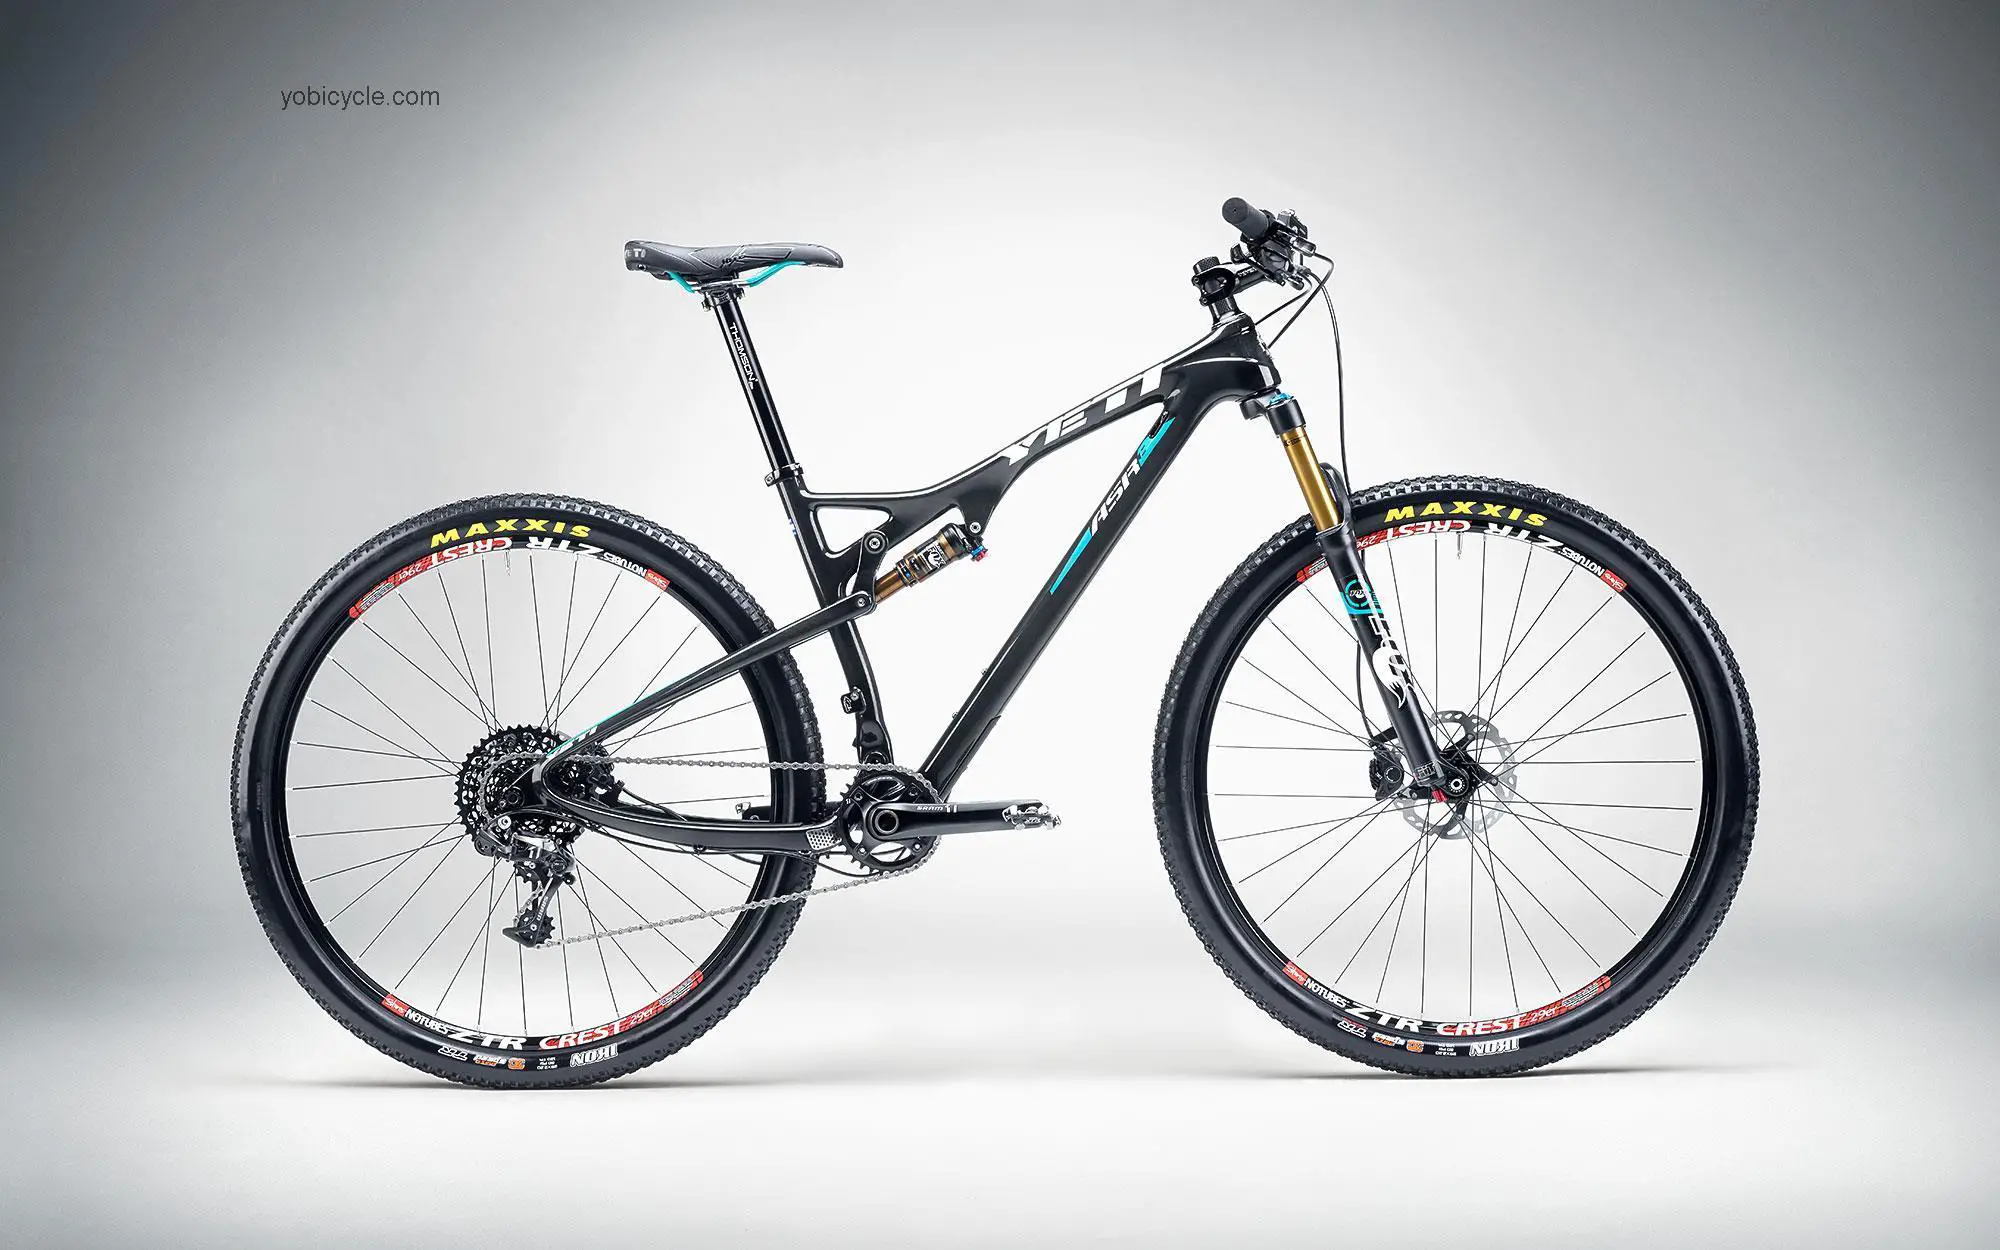 Yeti Asr Carbon X01 + ENVE competitors and comparison tool online specs and performance